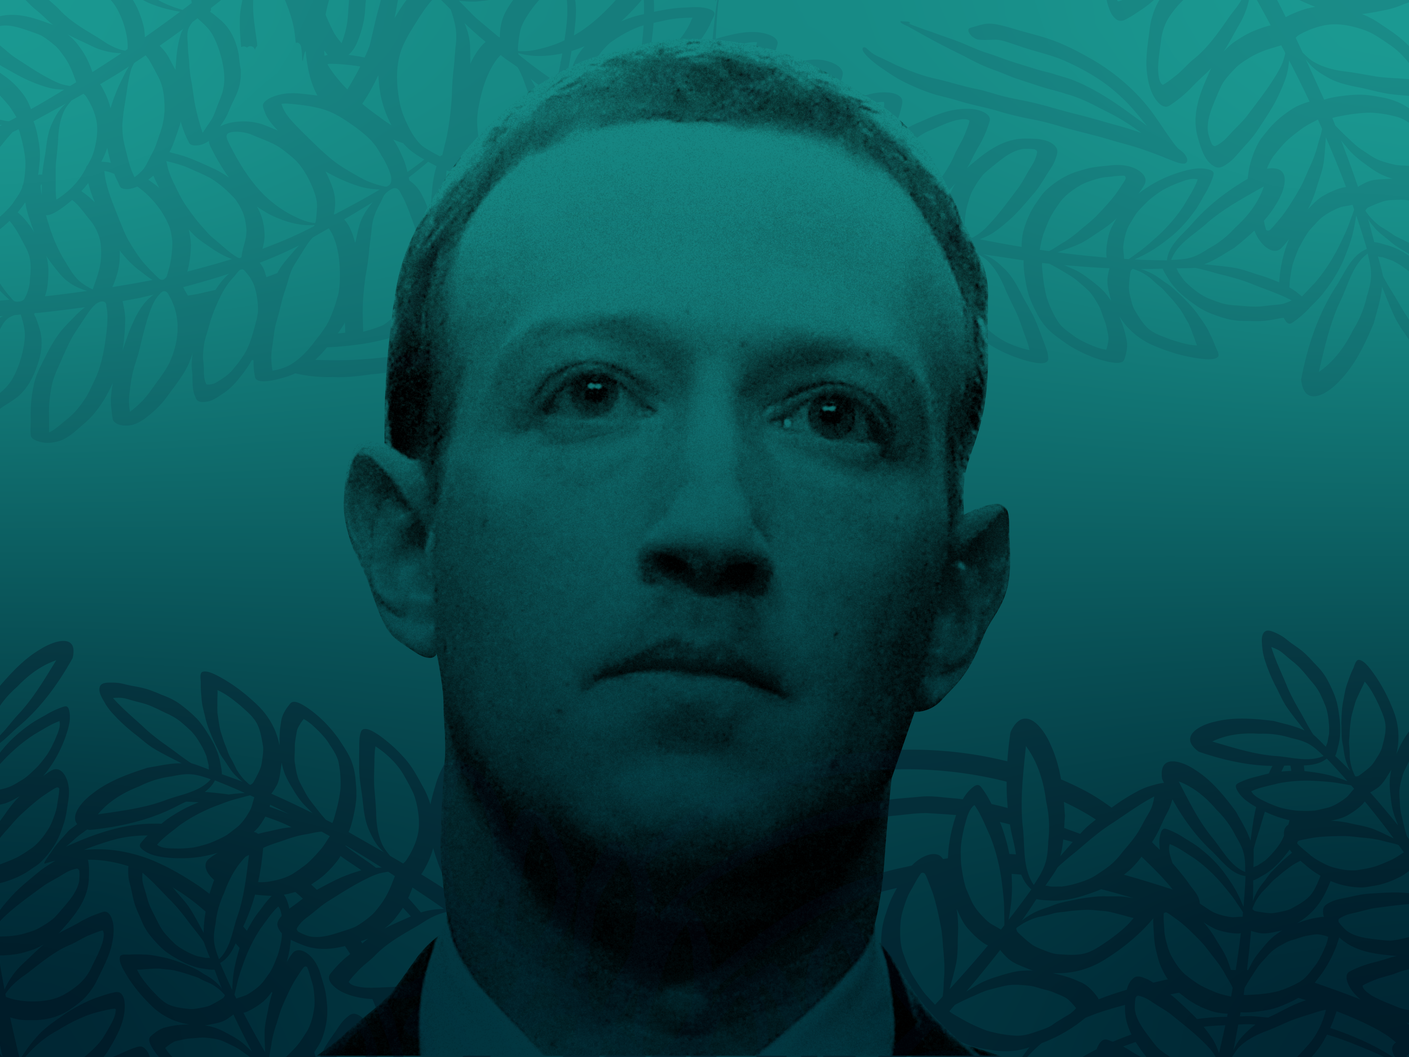 Mark Zuckerberg's headshot placed over a green background with Hawaiian leaves flowing through the top and bottom of the frame